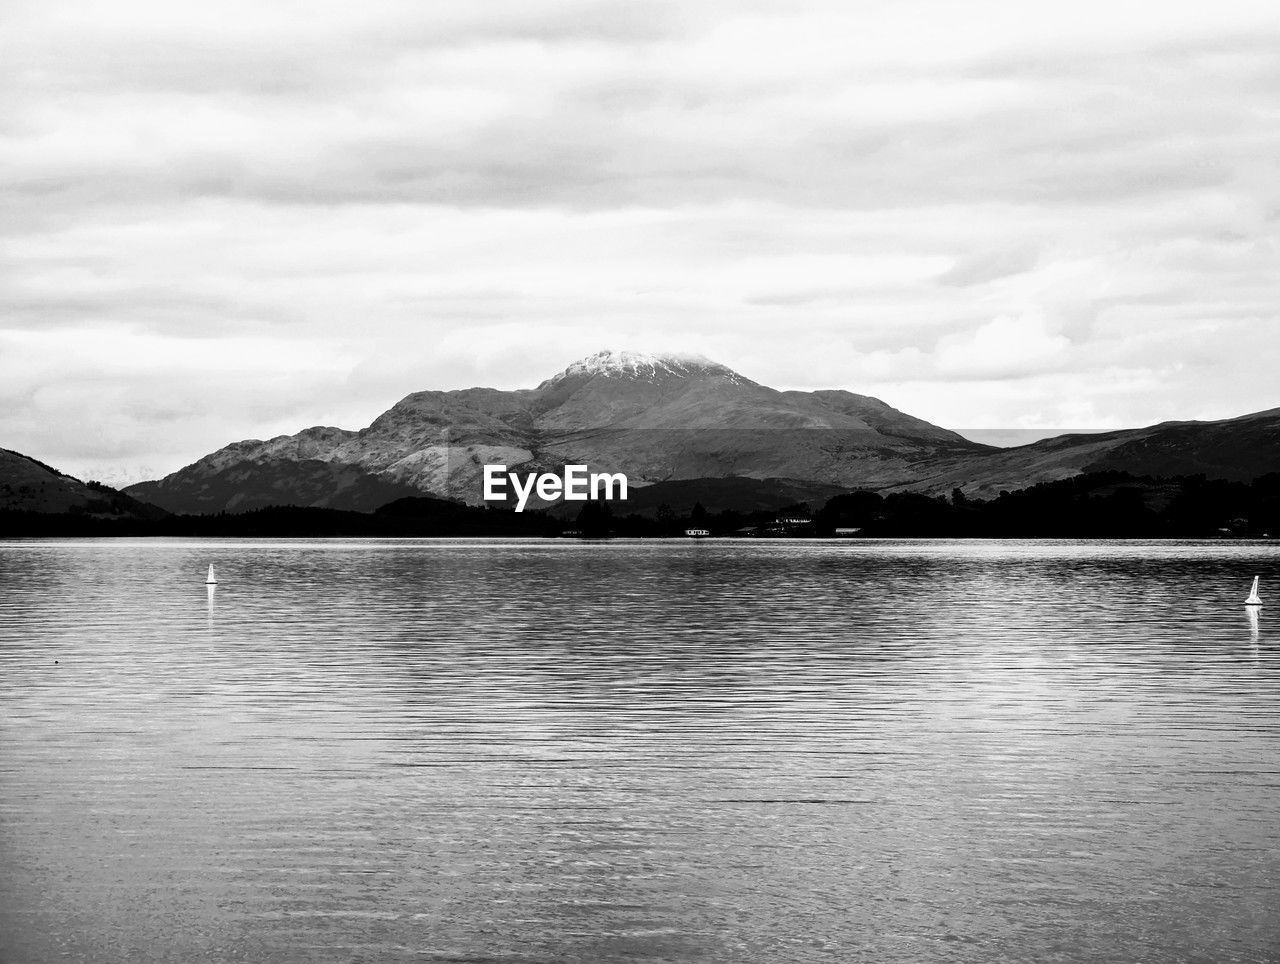 mountain, water, black and white, mountain range, scenics - nature, lake, monochrome photography, sky, monochrome, beauty in nature, cloud, reflection, tranquil scene, tranquility, nature, no people, horizon, environment, landscape, day, body of water, non-urban scene, land, travel destinations, outdoors, black, reservoir, white, remote, travel